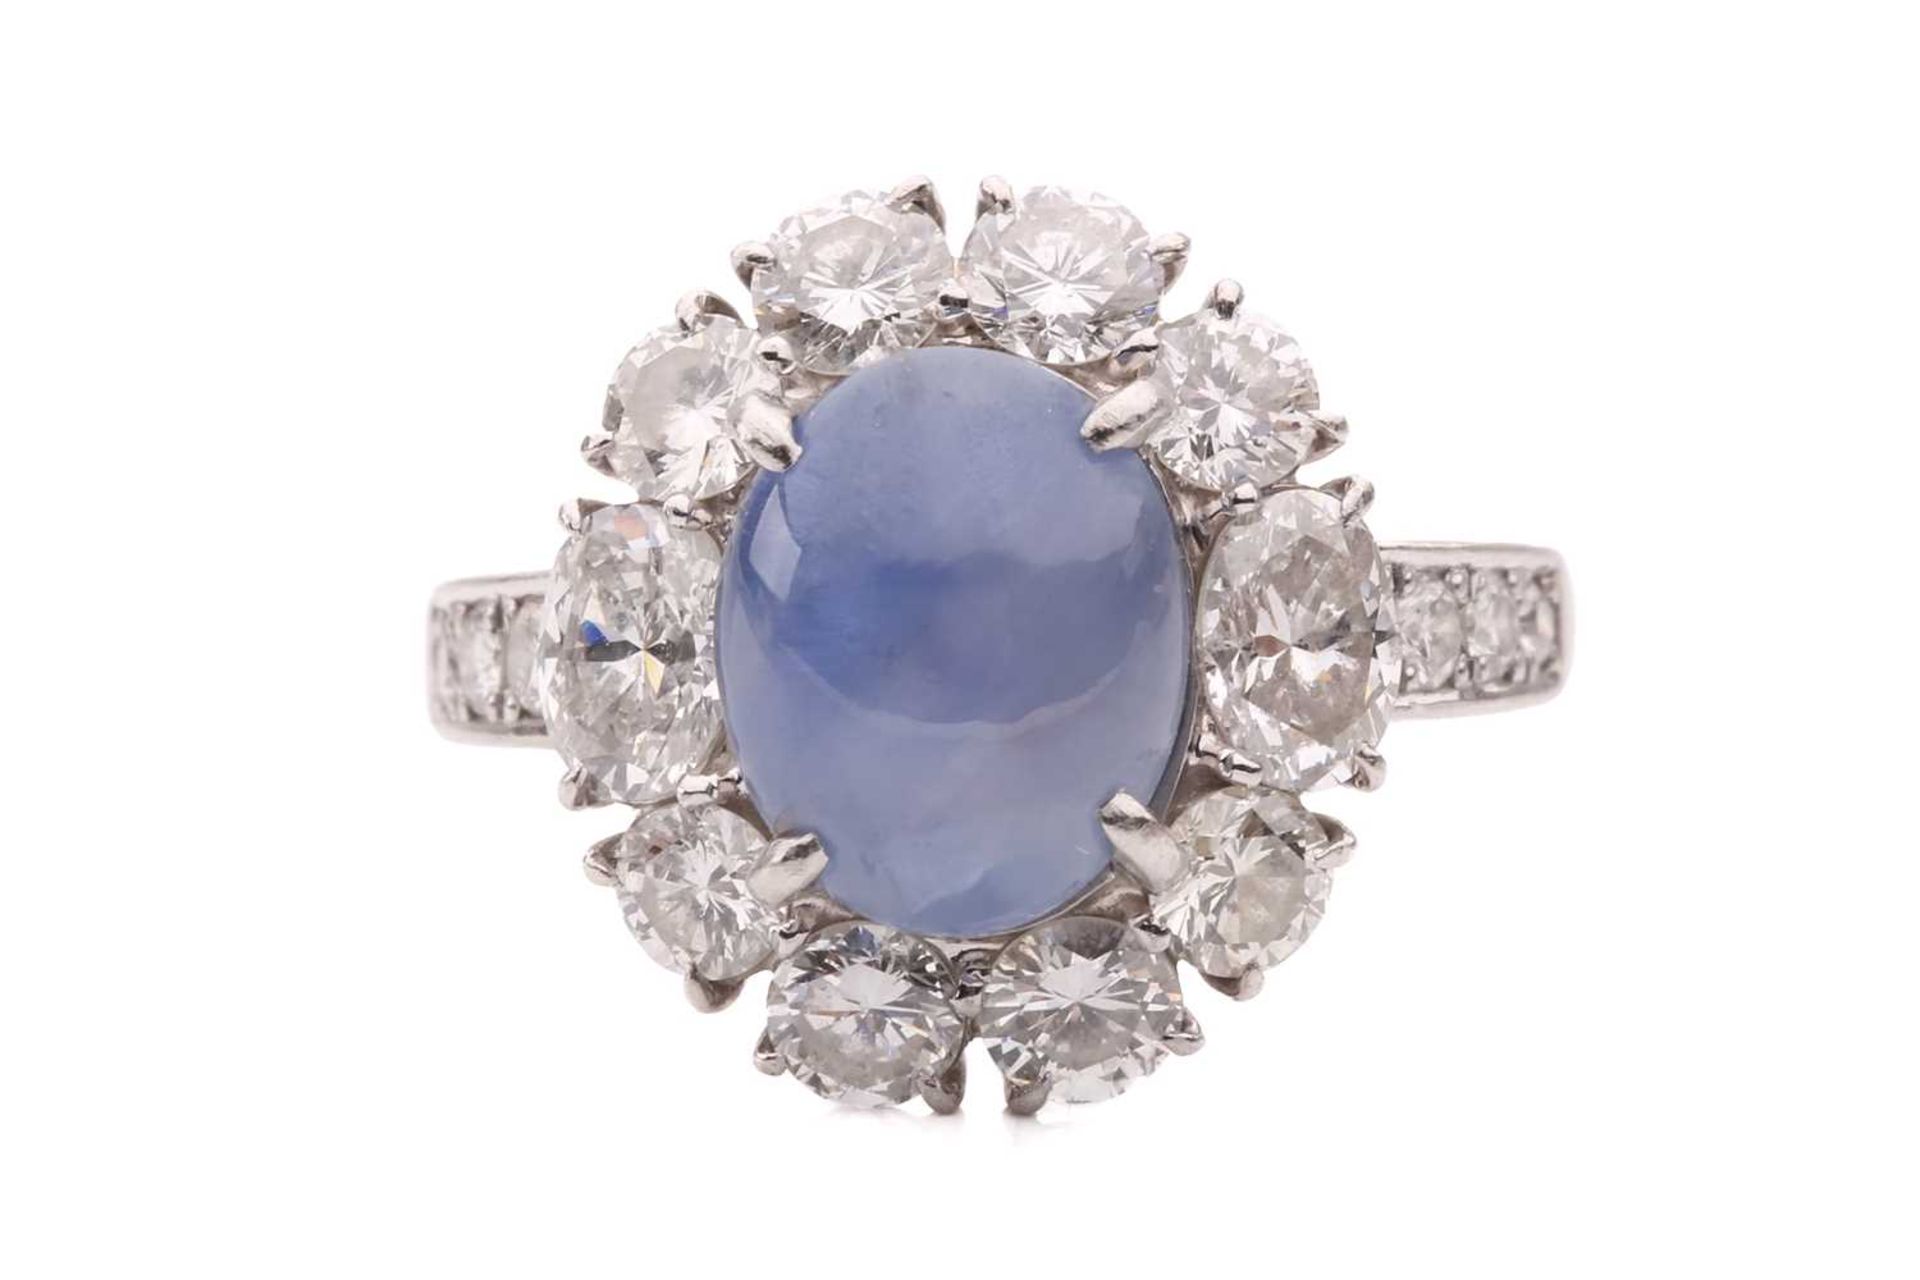 A star sapphire and diamond entourage ring, centred with a star sapphire of 9.7 x 7.7 x 6.0 mm, with